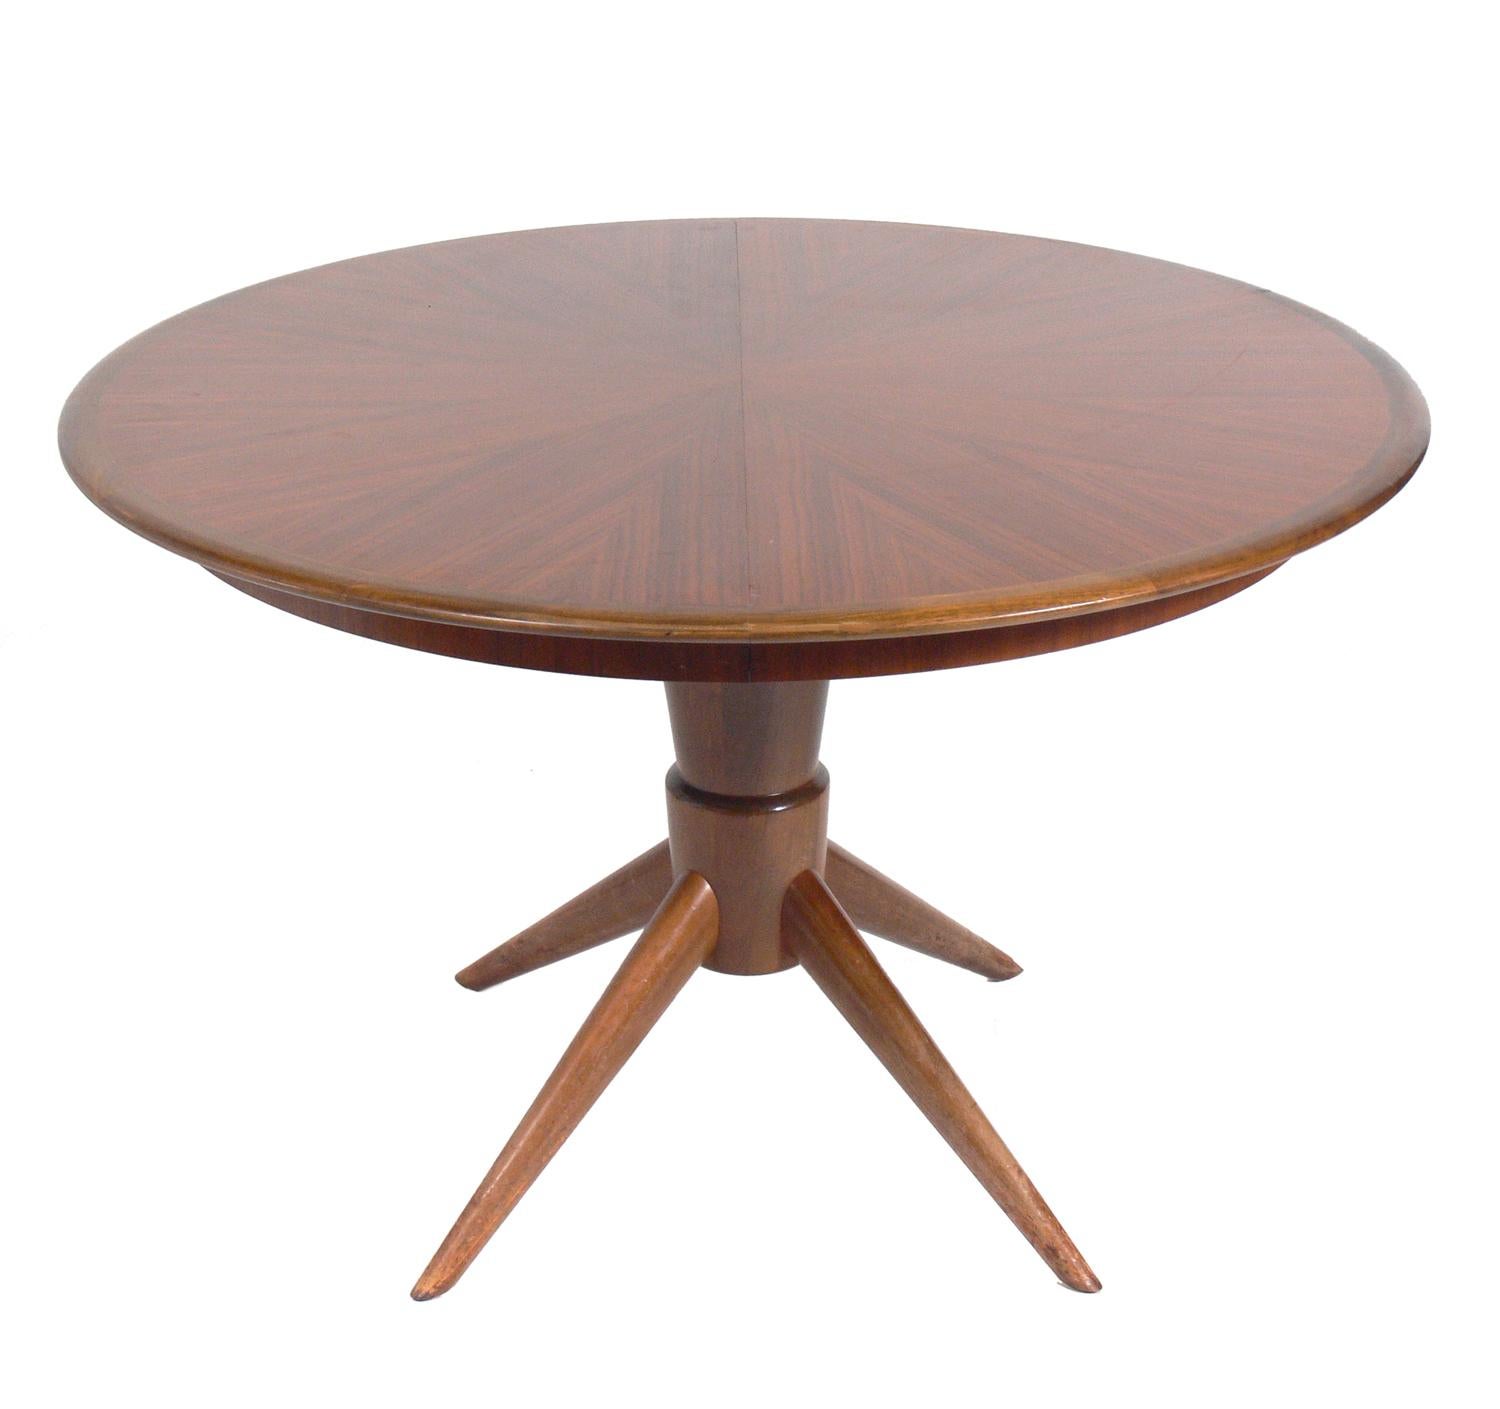 Mid-Century Modern Italian Dining Table Attributed to Melchiorre Bega